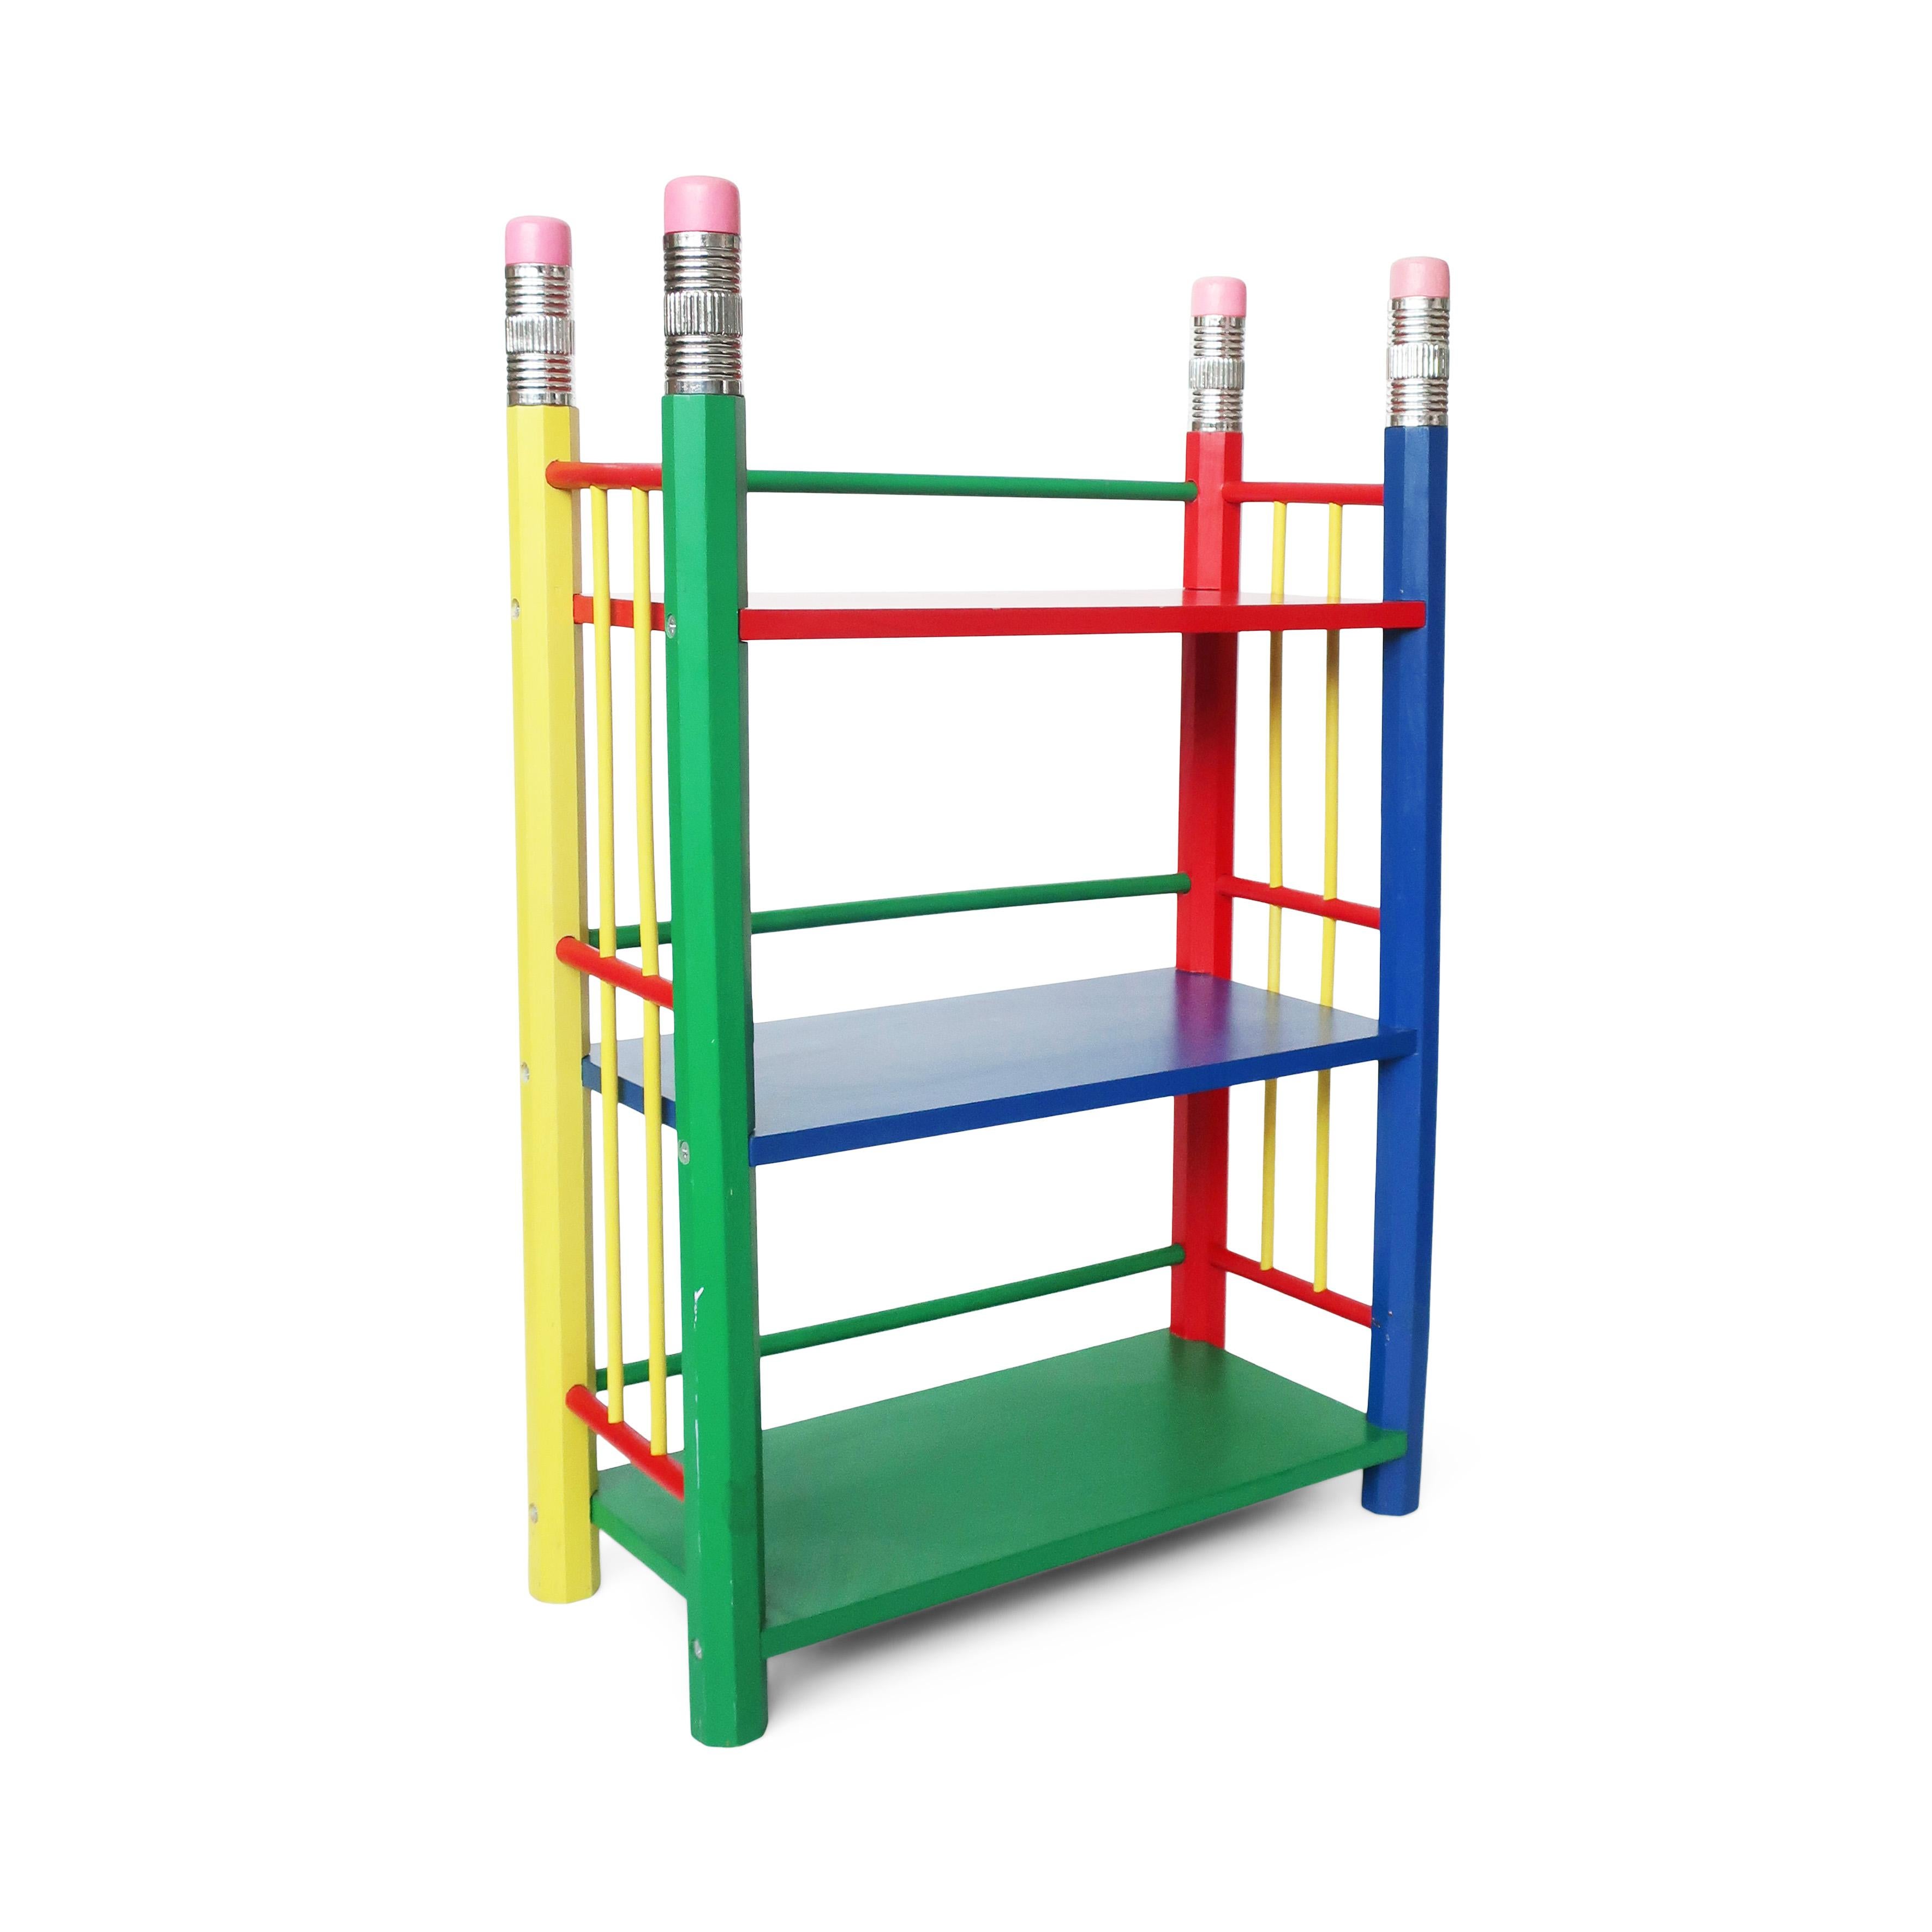 A great postmodern bookshelf from Pierre Sala's pencil themed furniture from the 1980s for Pierre Sala Furniture. Its striking primarily colored design is composed of three shelves (one blue, one green, and one red) supported by four pencils in red,